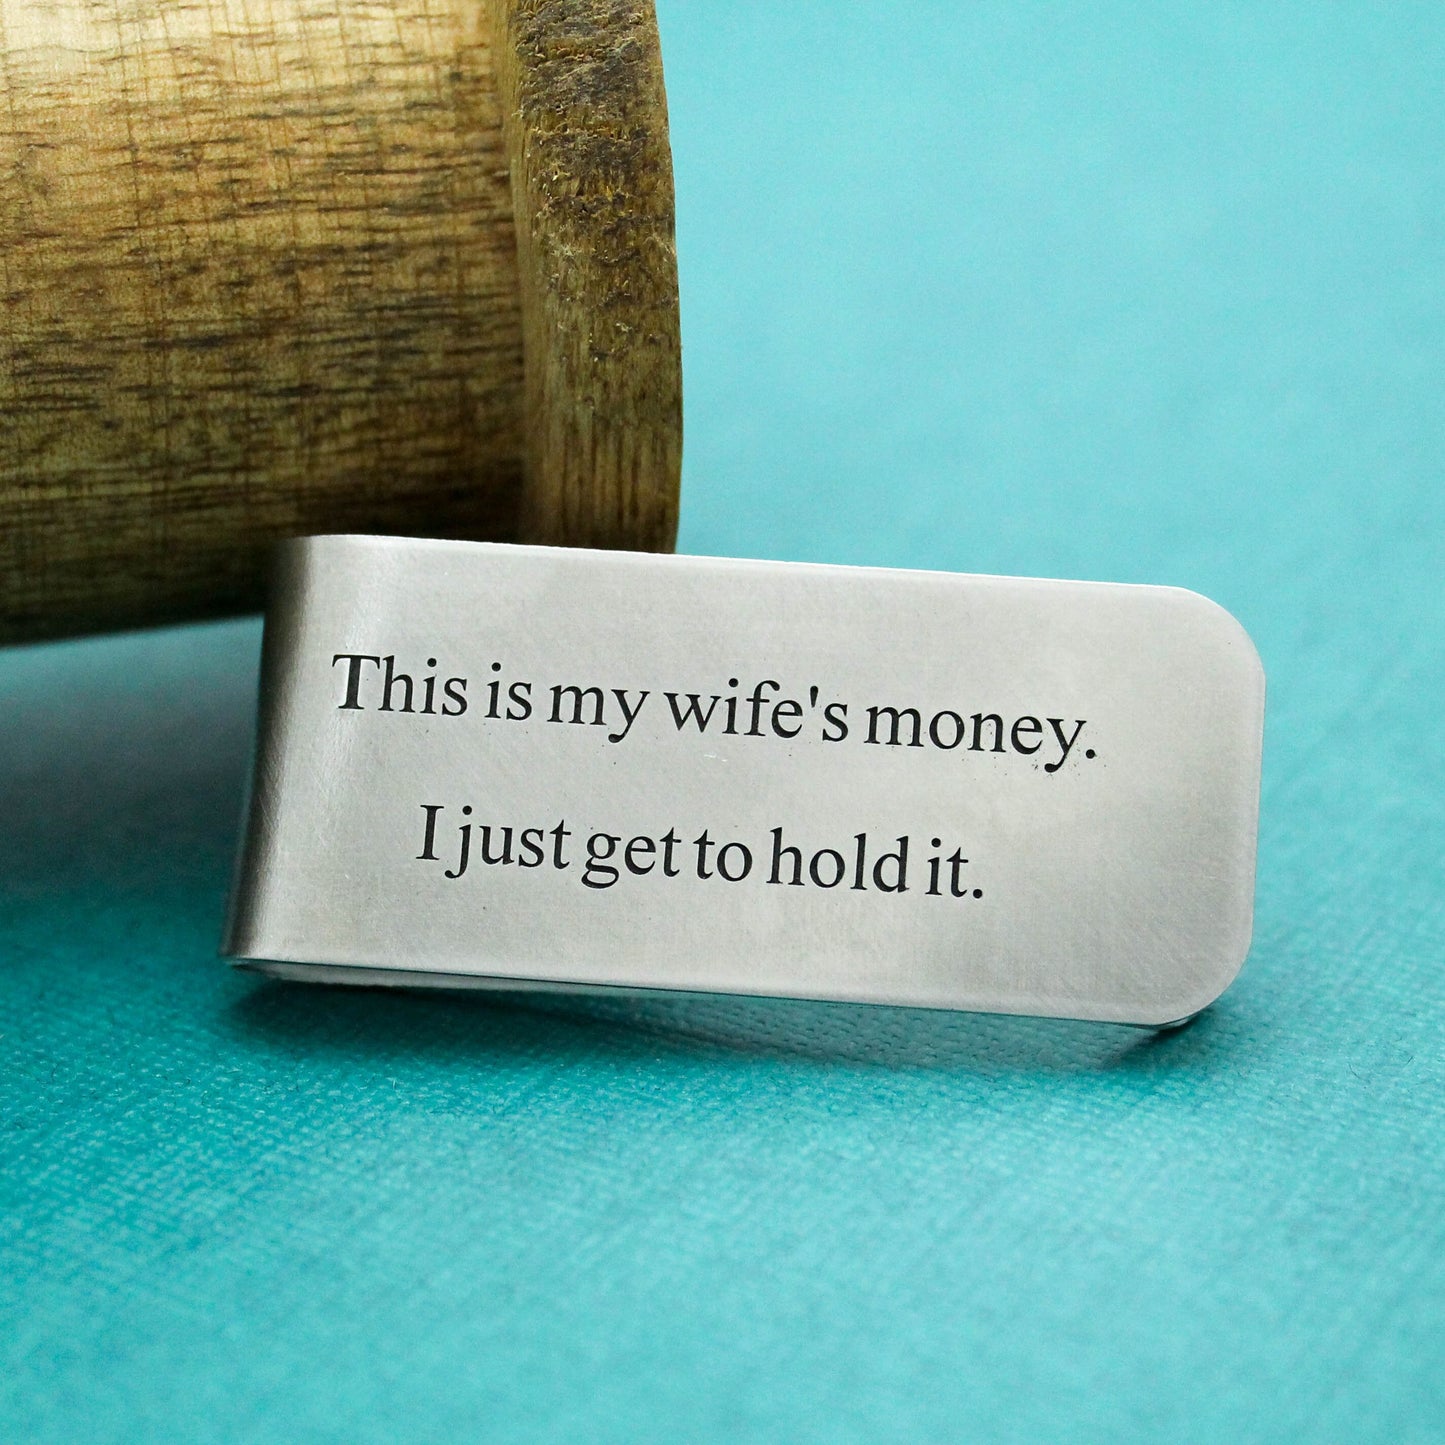 This Is My Wife's Money - I Just Get To Hold It Money Clip, Daddy or Grandfather Money Clip Aluminum Engraved Personalized Gift Father's Day